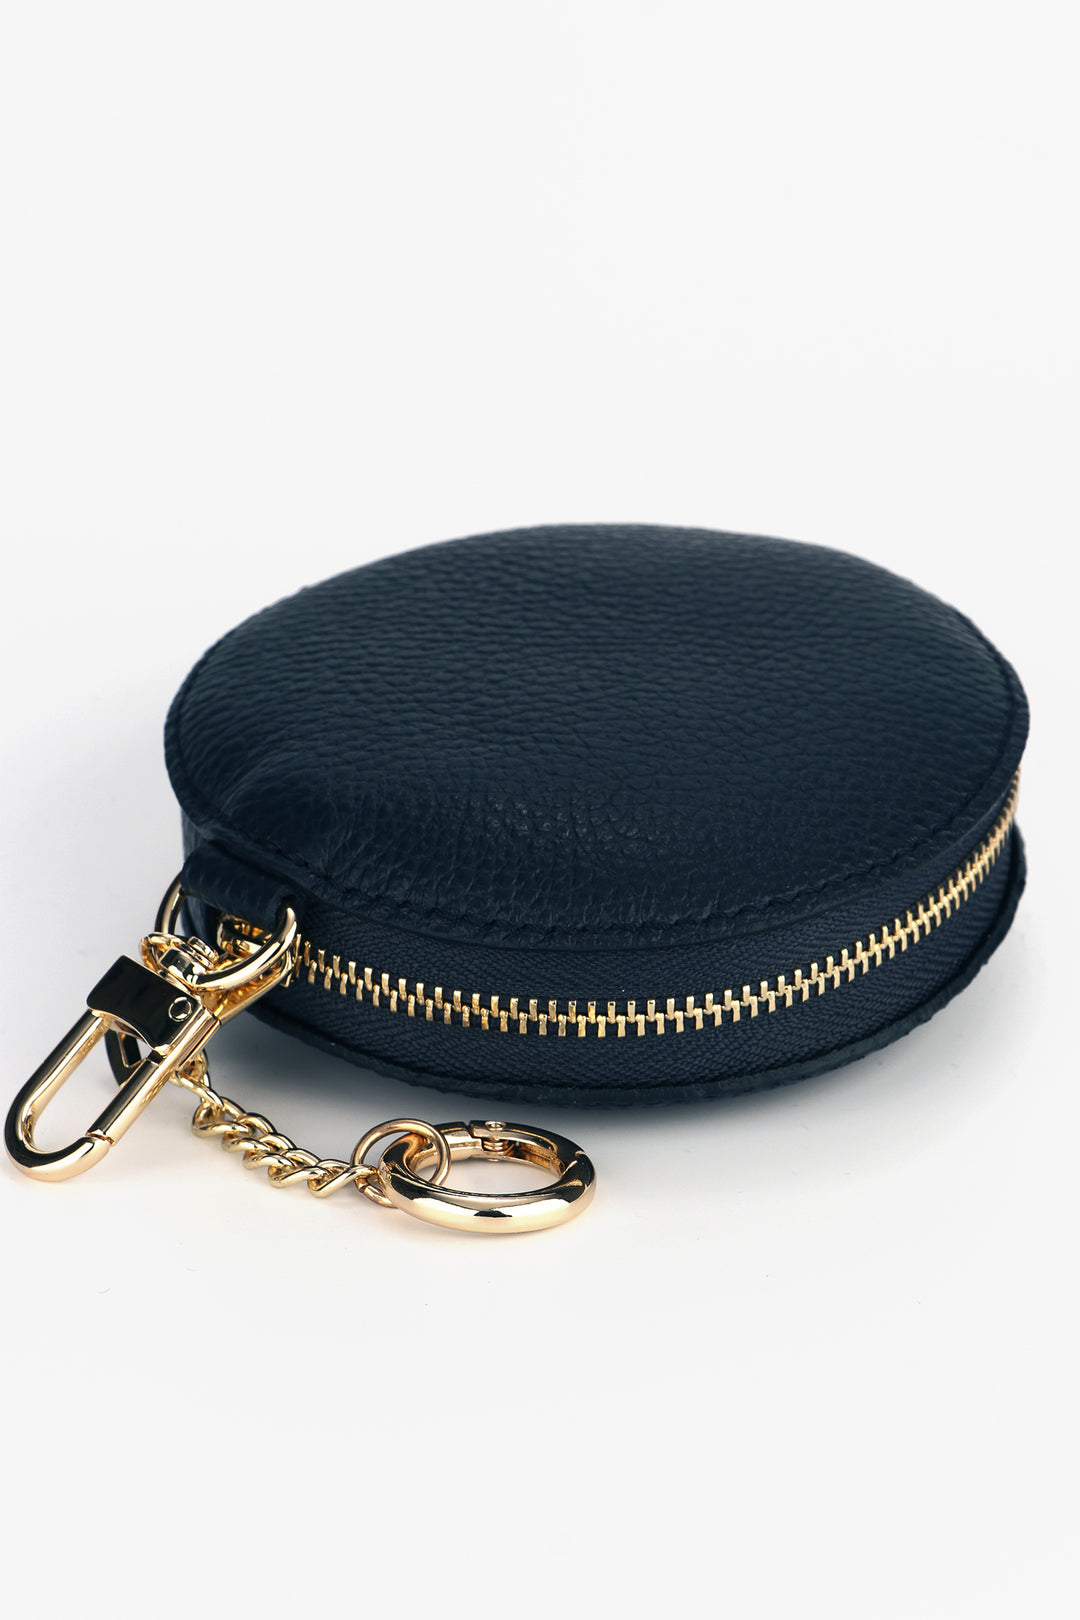 navy blue clip on leather coin purse with secure zip closure